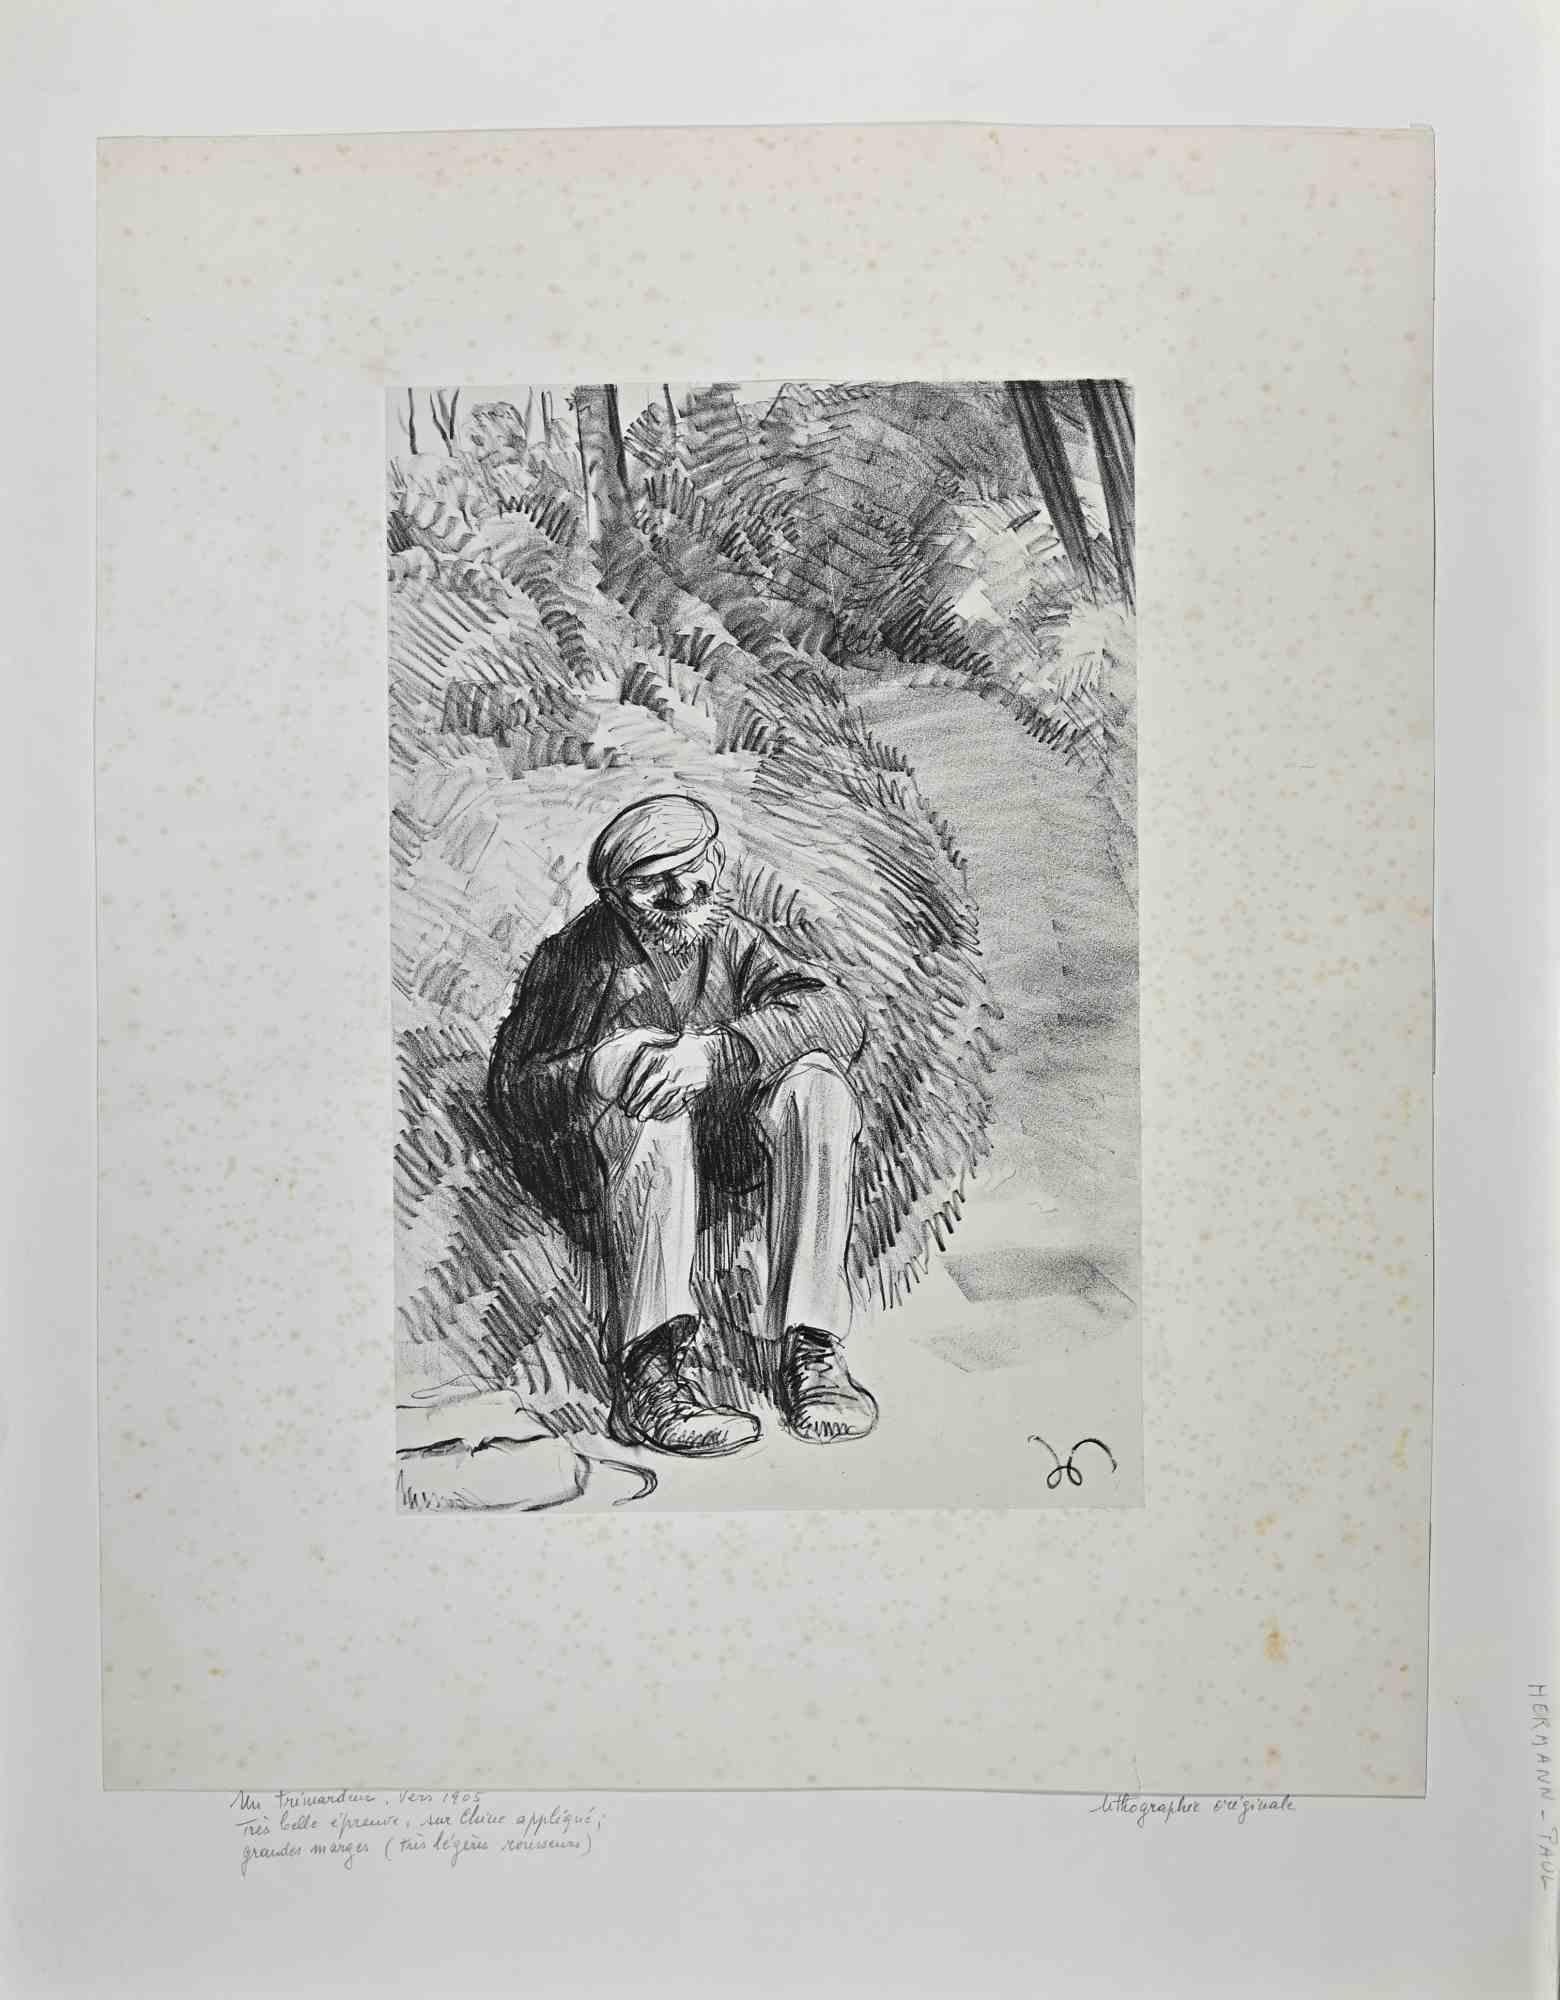 Getting Rest is aLithograph realized by Paul Hermann in 1905 ca.

Good conditions except for some foxings.

Signed on plate.

The artwork is depicted in a well-balanced composition.